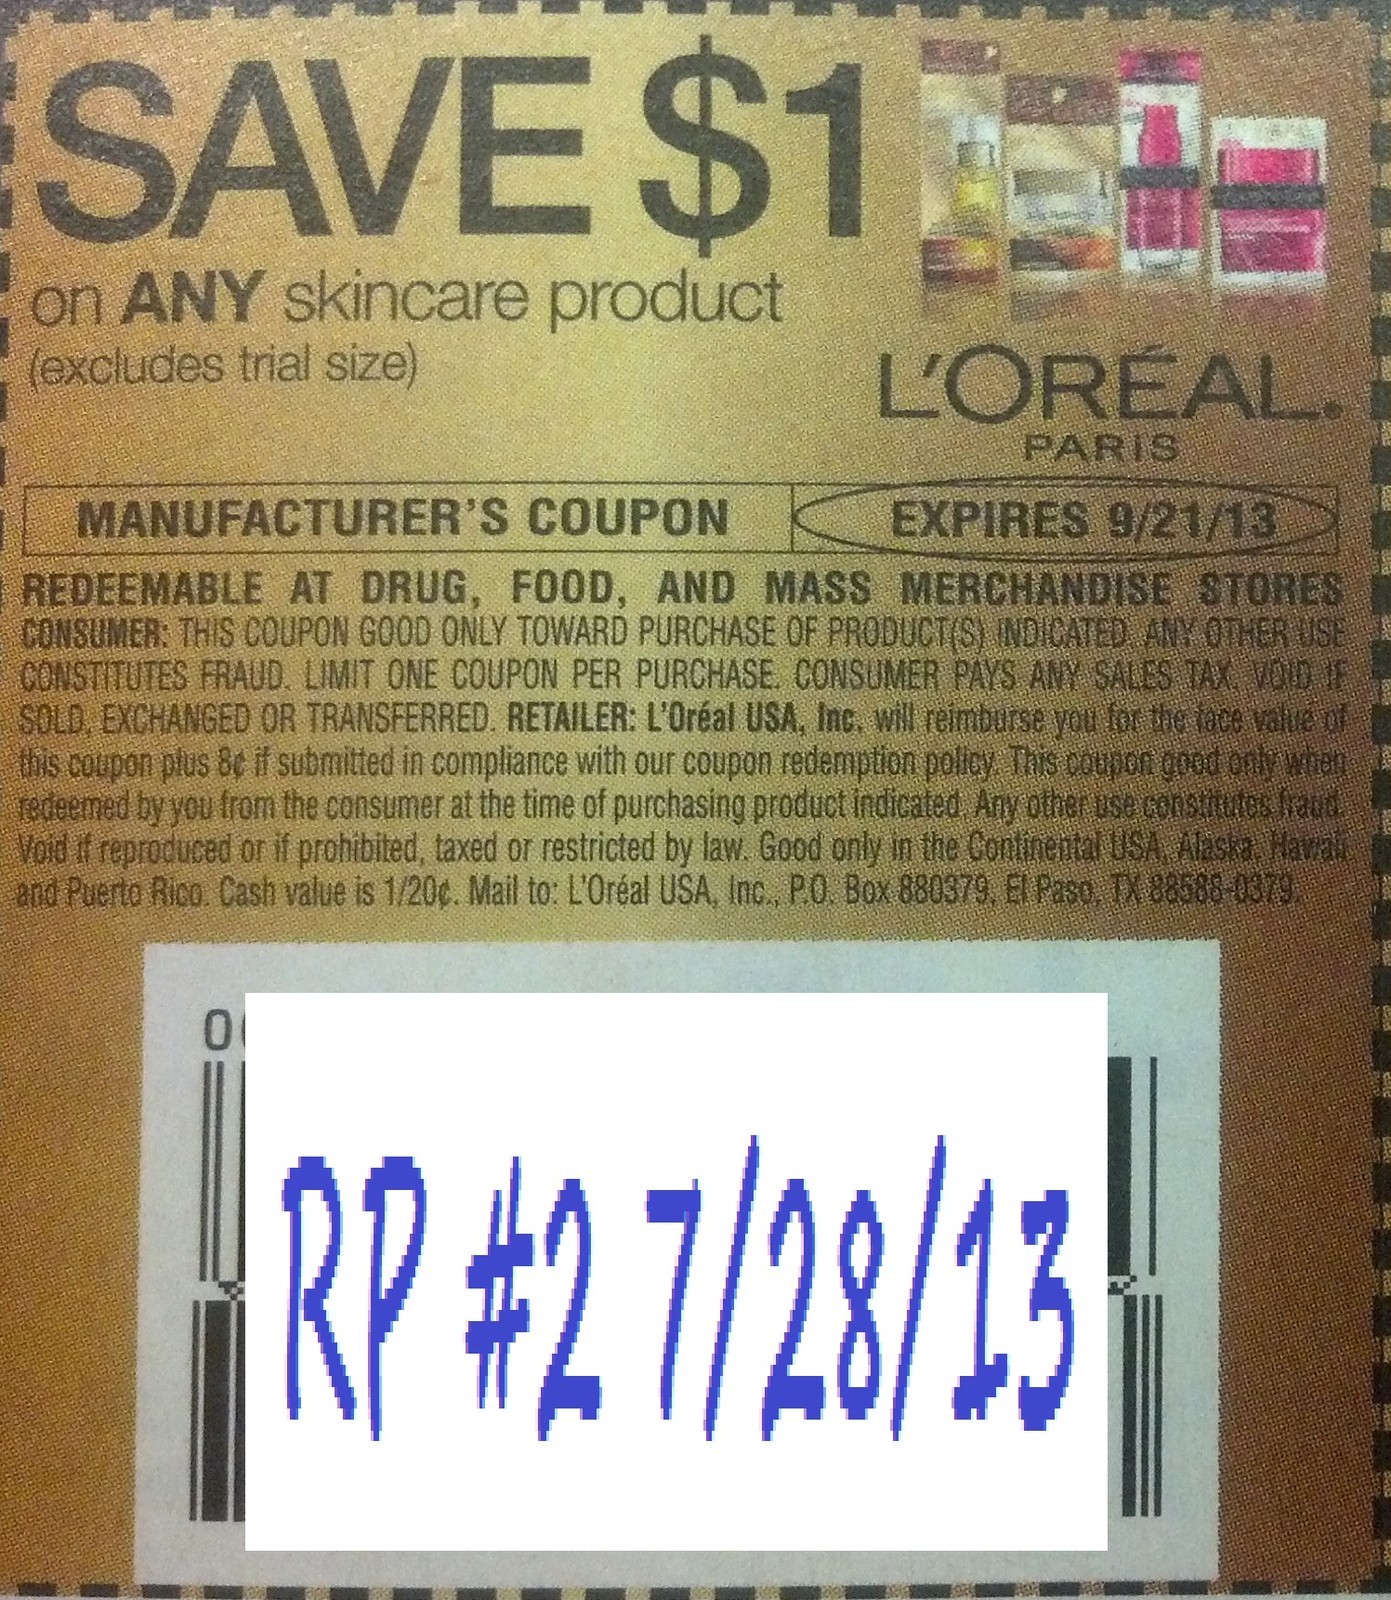 Save $1.00 on any L'Oreal Paris skincare product (excludes trial size) Expires 09/21/2013